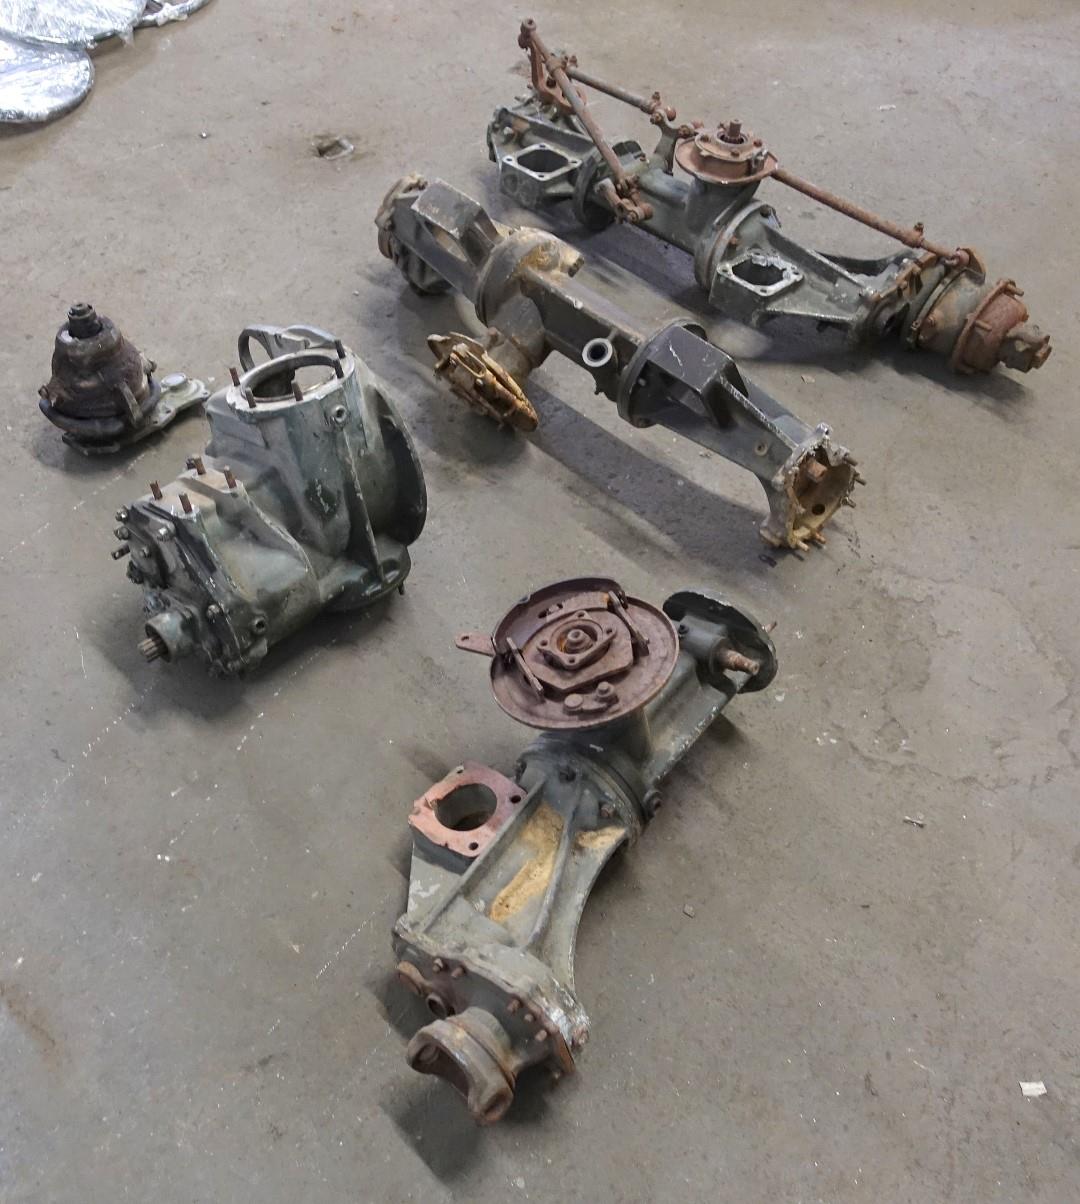 MU-114 | MU-114 Mule M274 Front and Rear Axle and Transmission Parts USED (6) (Large).JPG